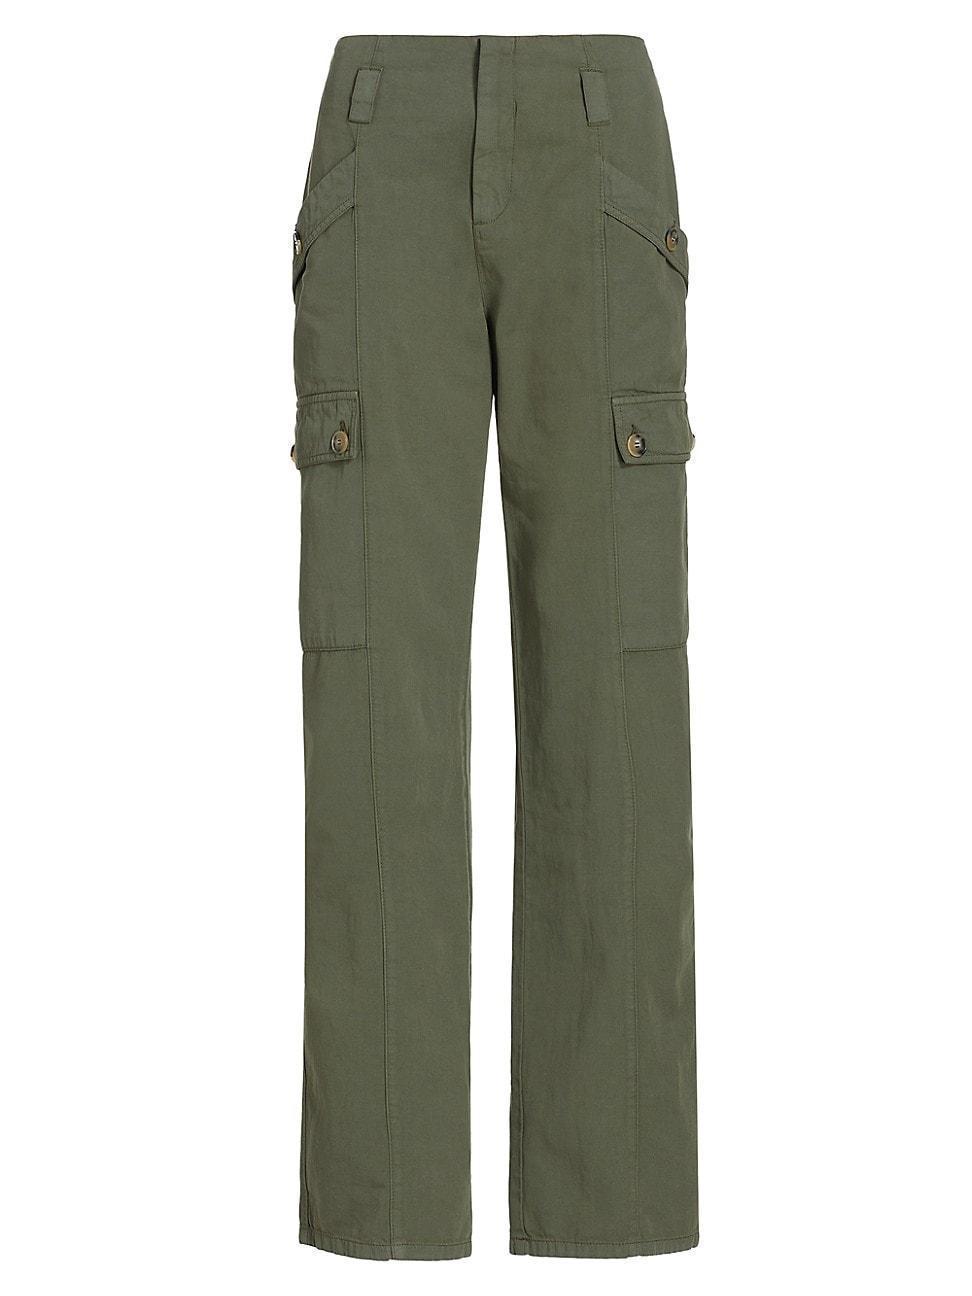 Womens Dada Cotton-Blend Cargo Pants Product Image